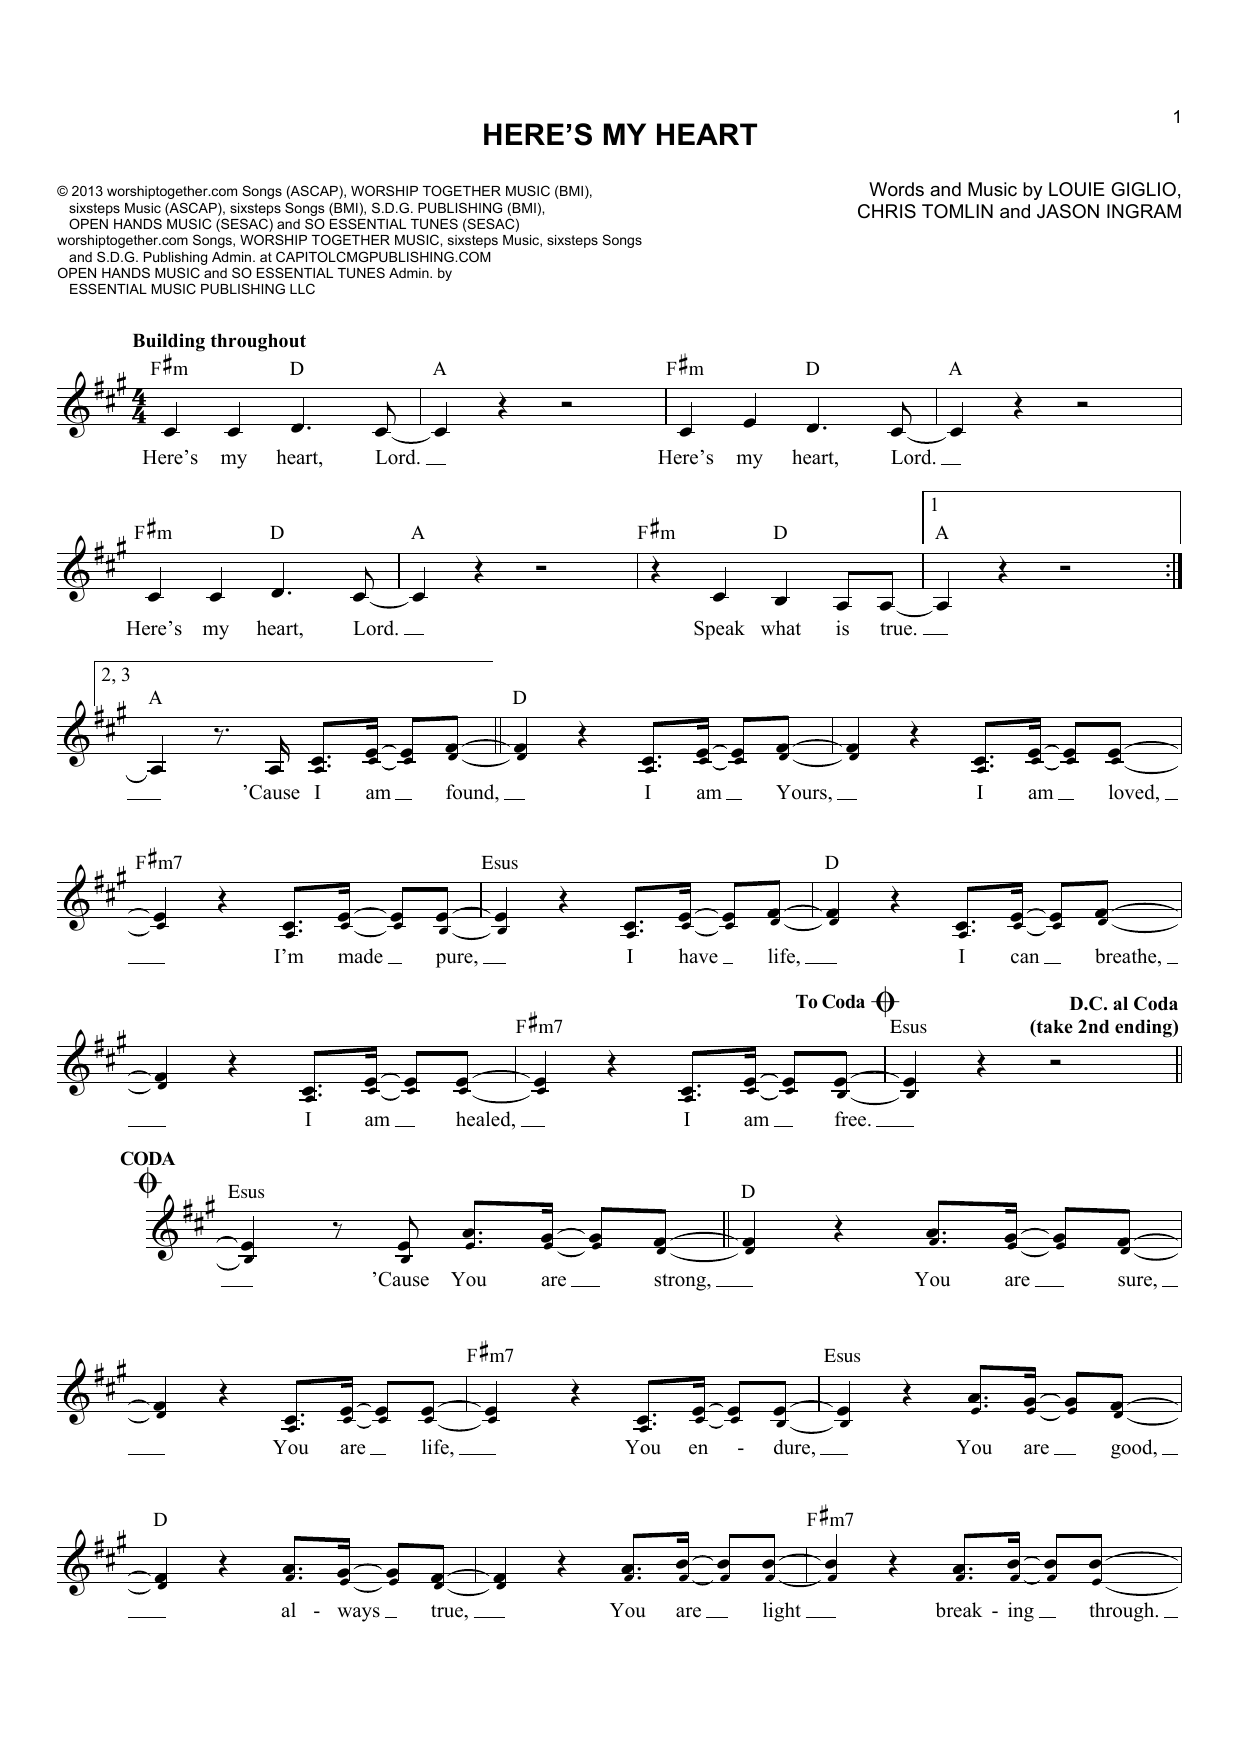 Download Passion Here's My Heart Sheet Music